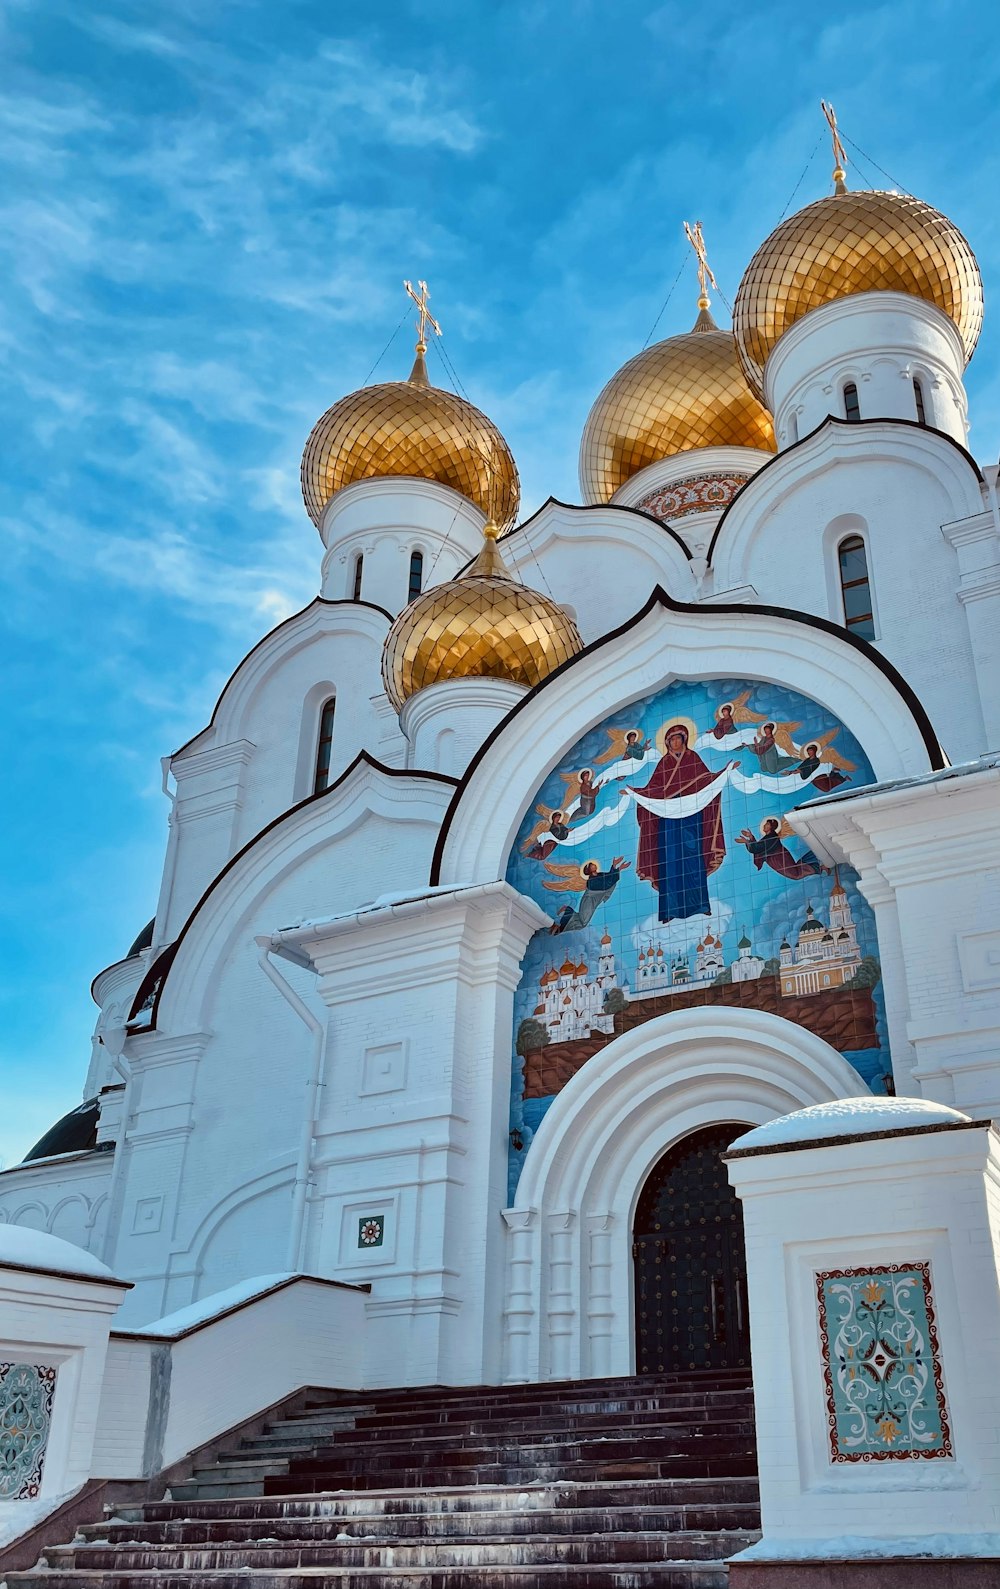 a white church with gold domes under a blue sky